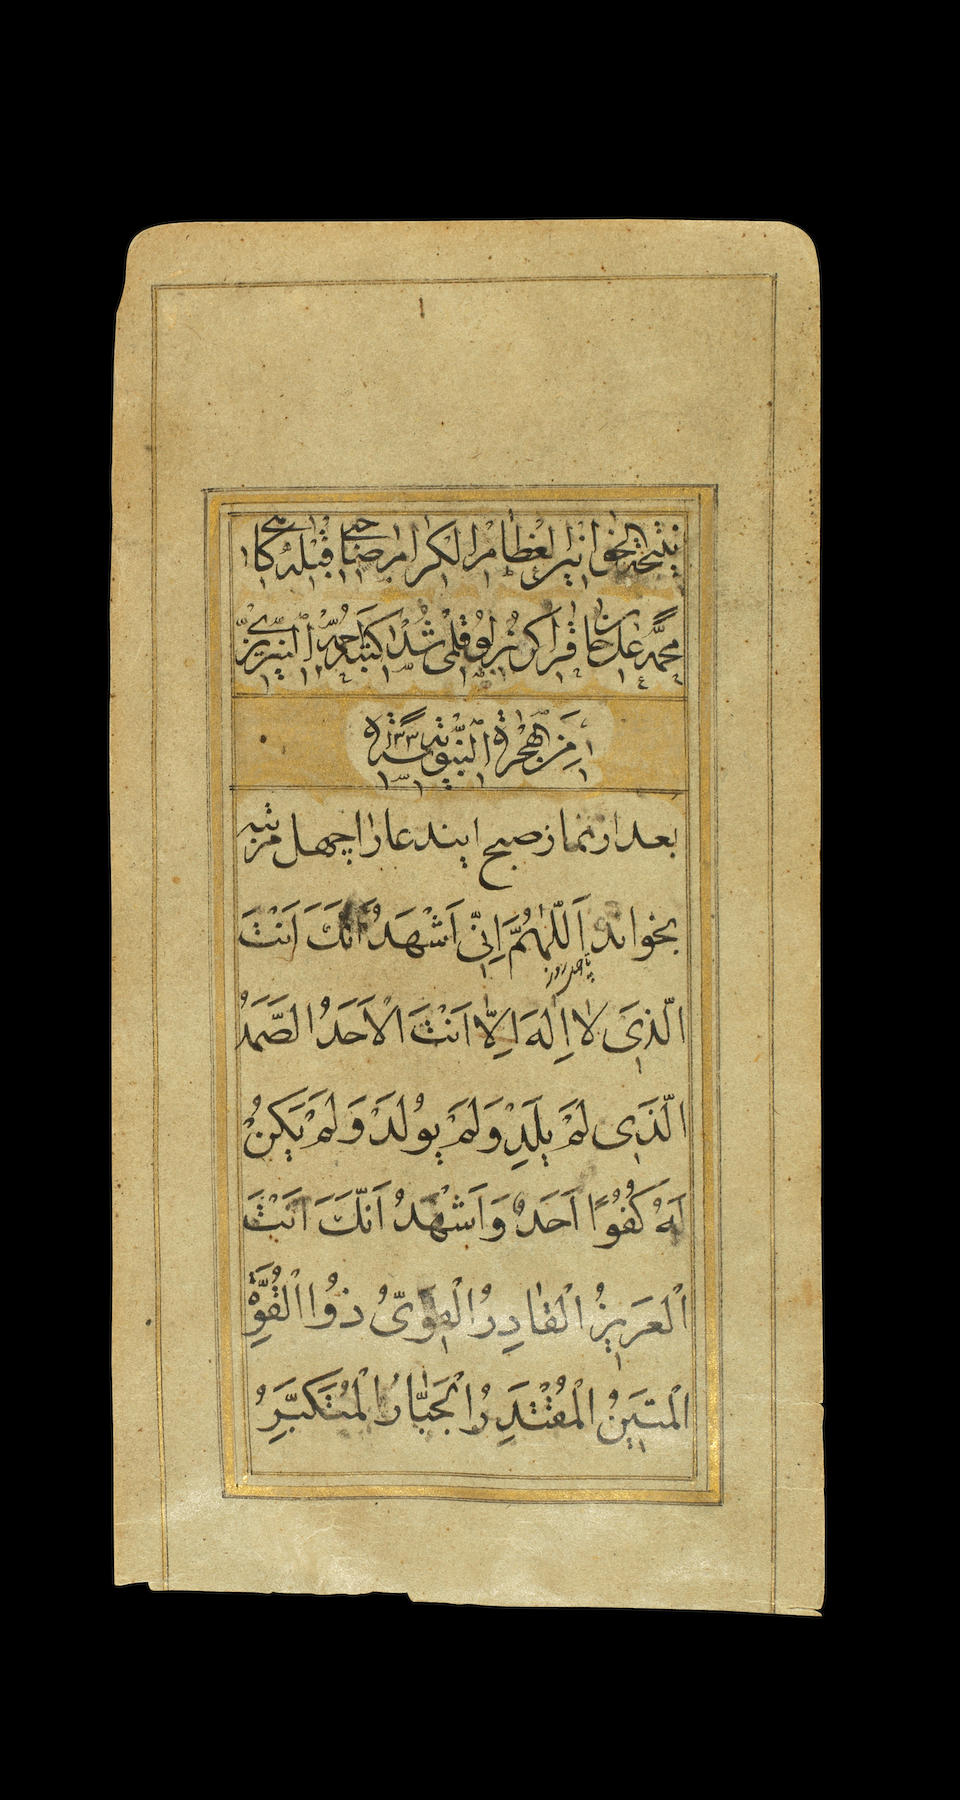 A prayer book in safinah form, copied by the famous calligrapher Ahmad al-Nayrizi (d. AH 1155/AD 1742-43), commissioned by a certain Muhammad 'Ali Khan Qaraguzlu Persia, dated AH 1133/AD 1720-21